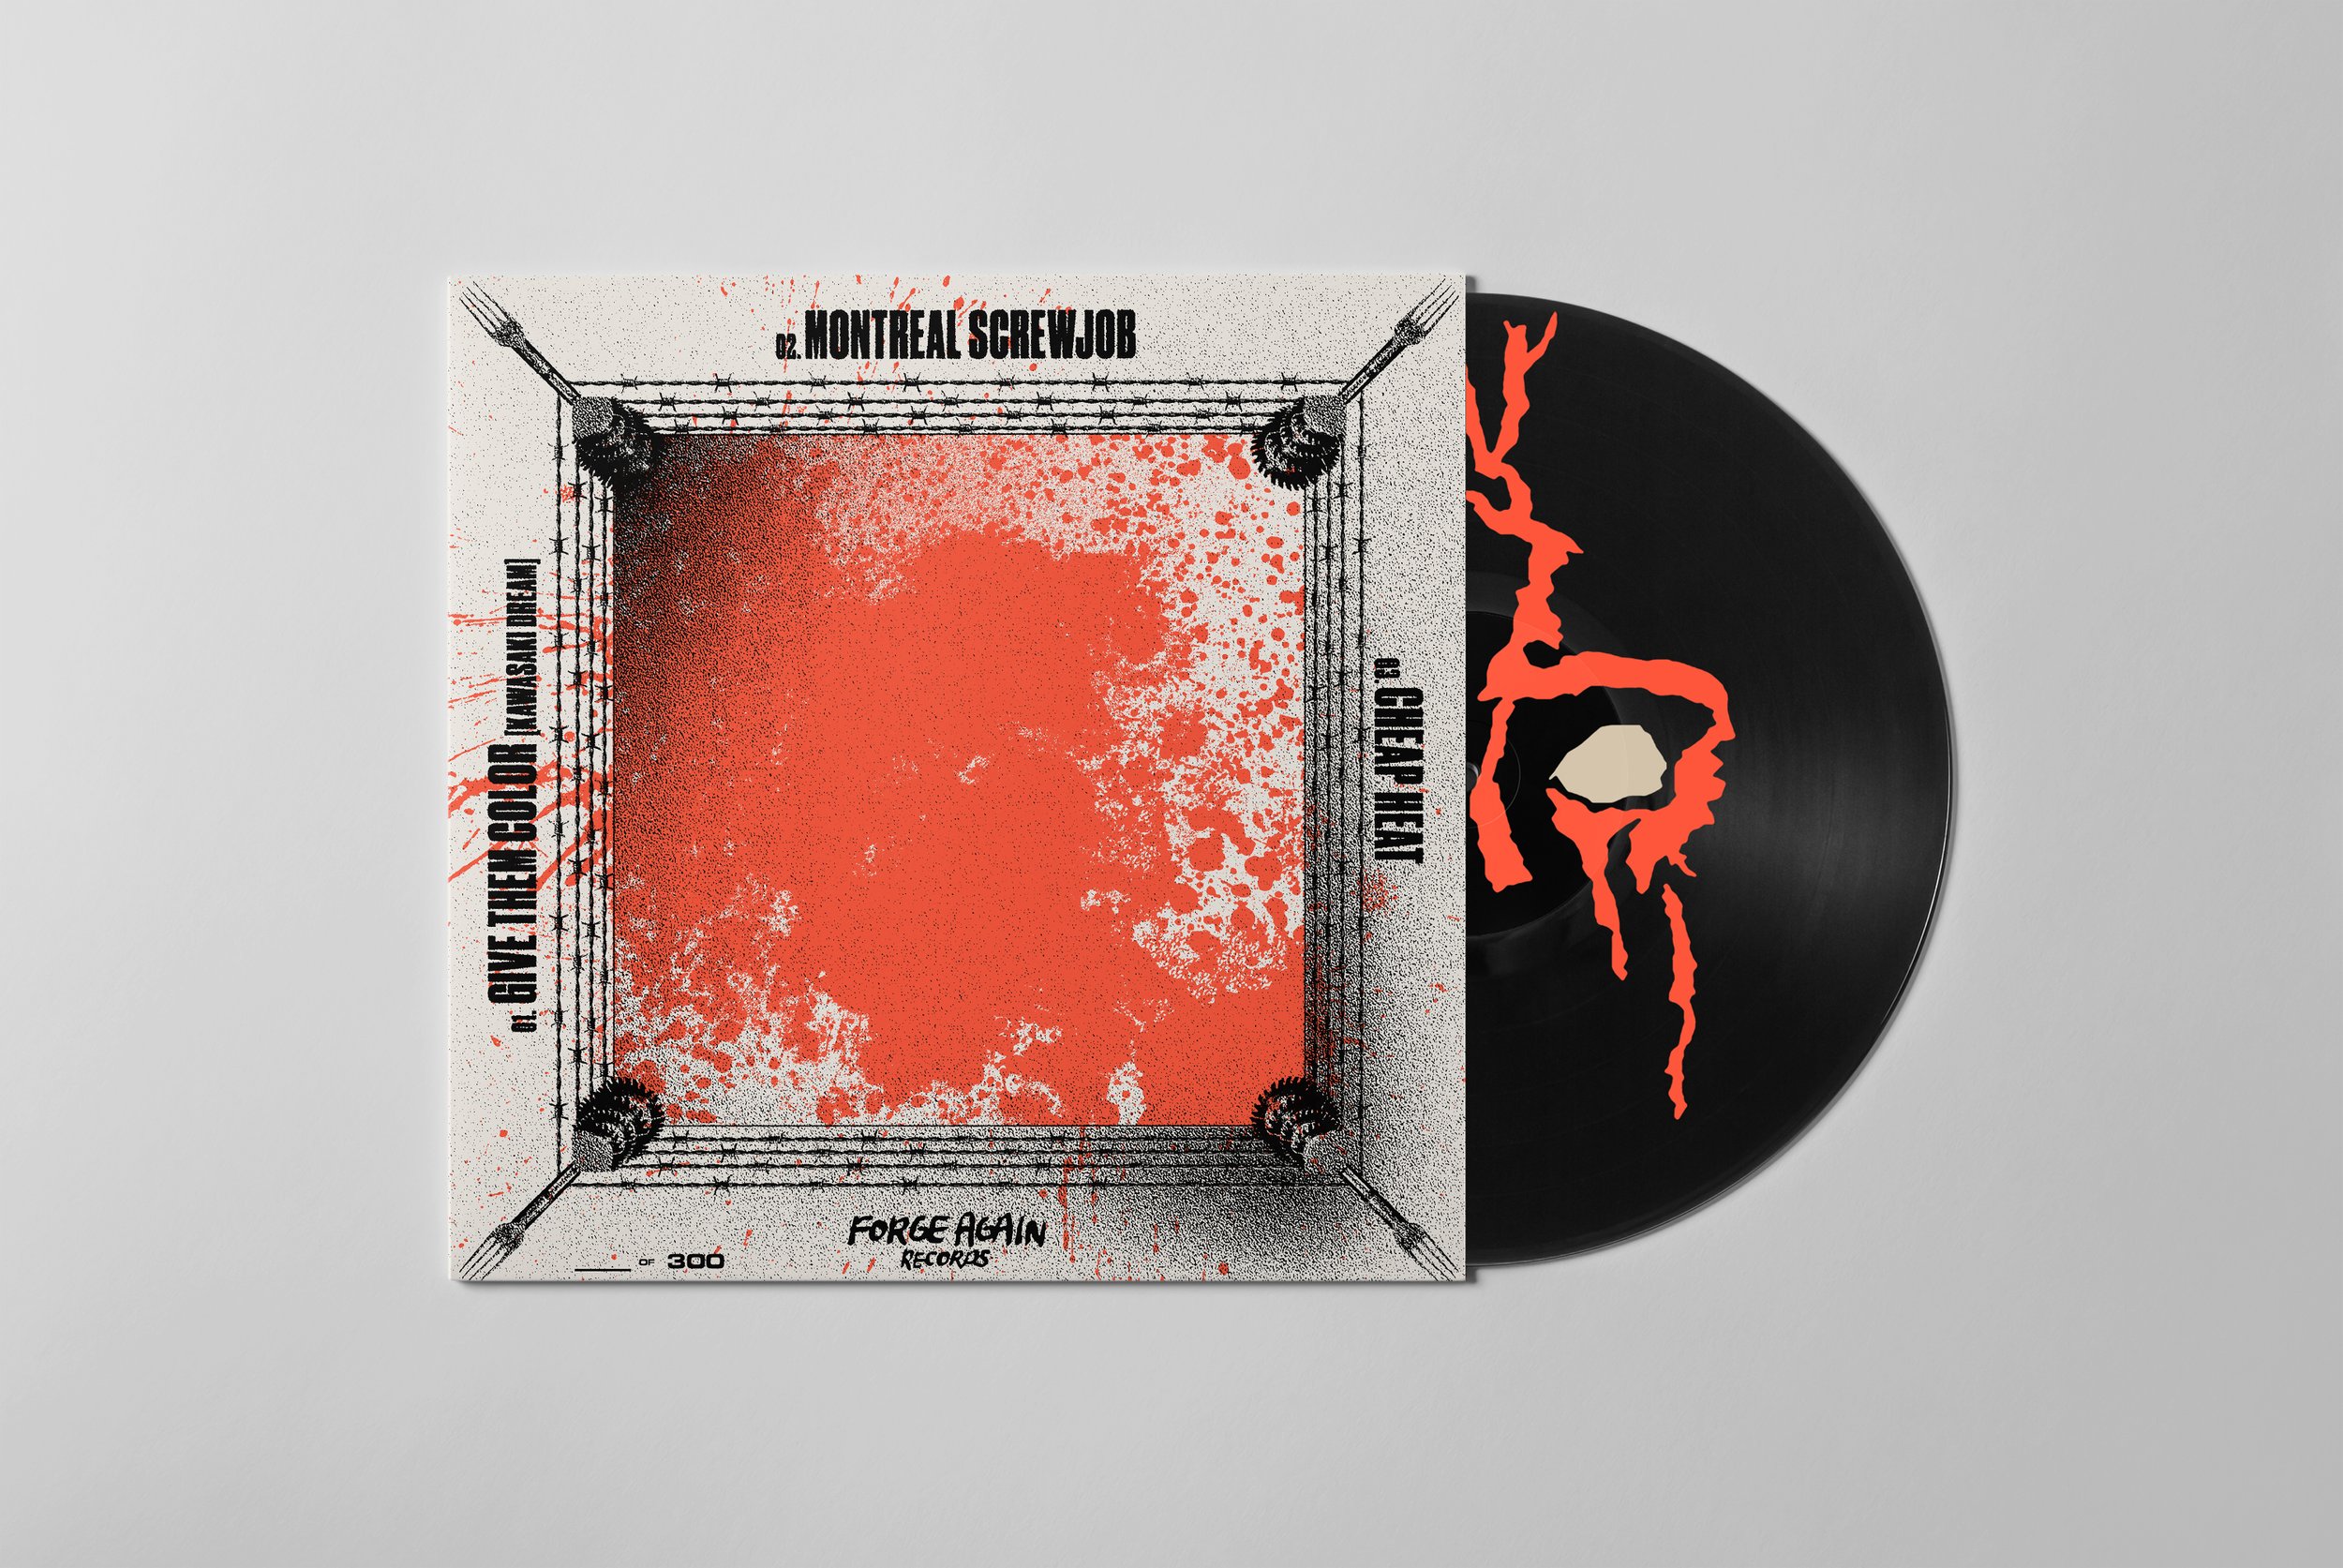 Old Gods - GIVE THEM COLOR LP pre-order up now! — Forge Records